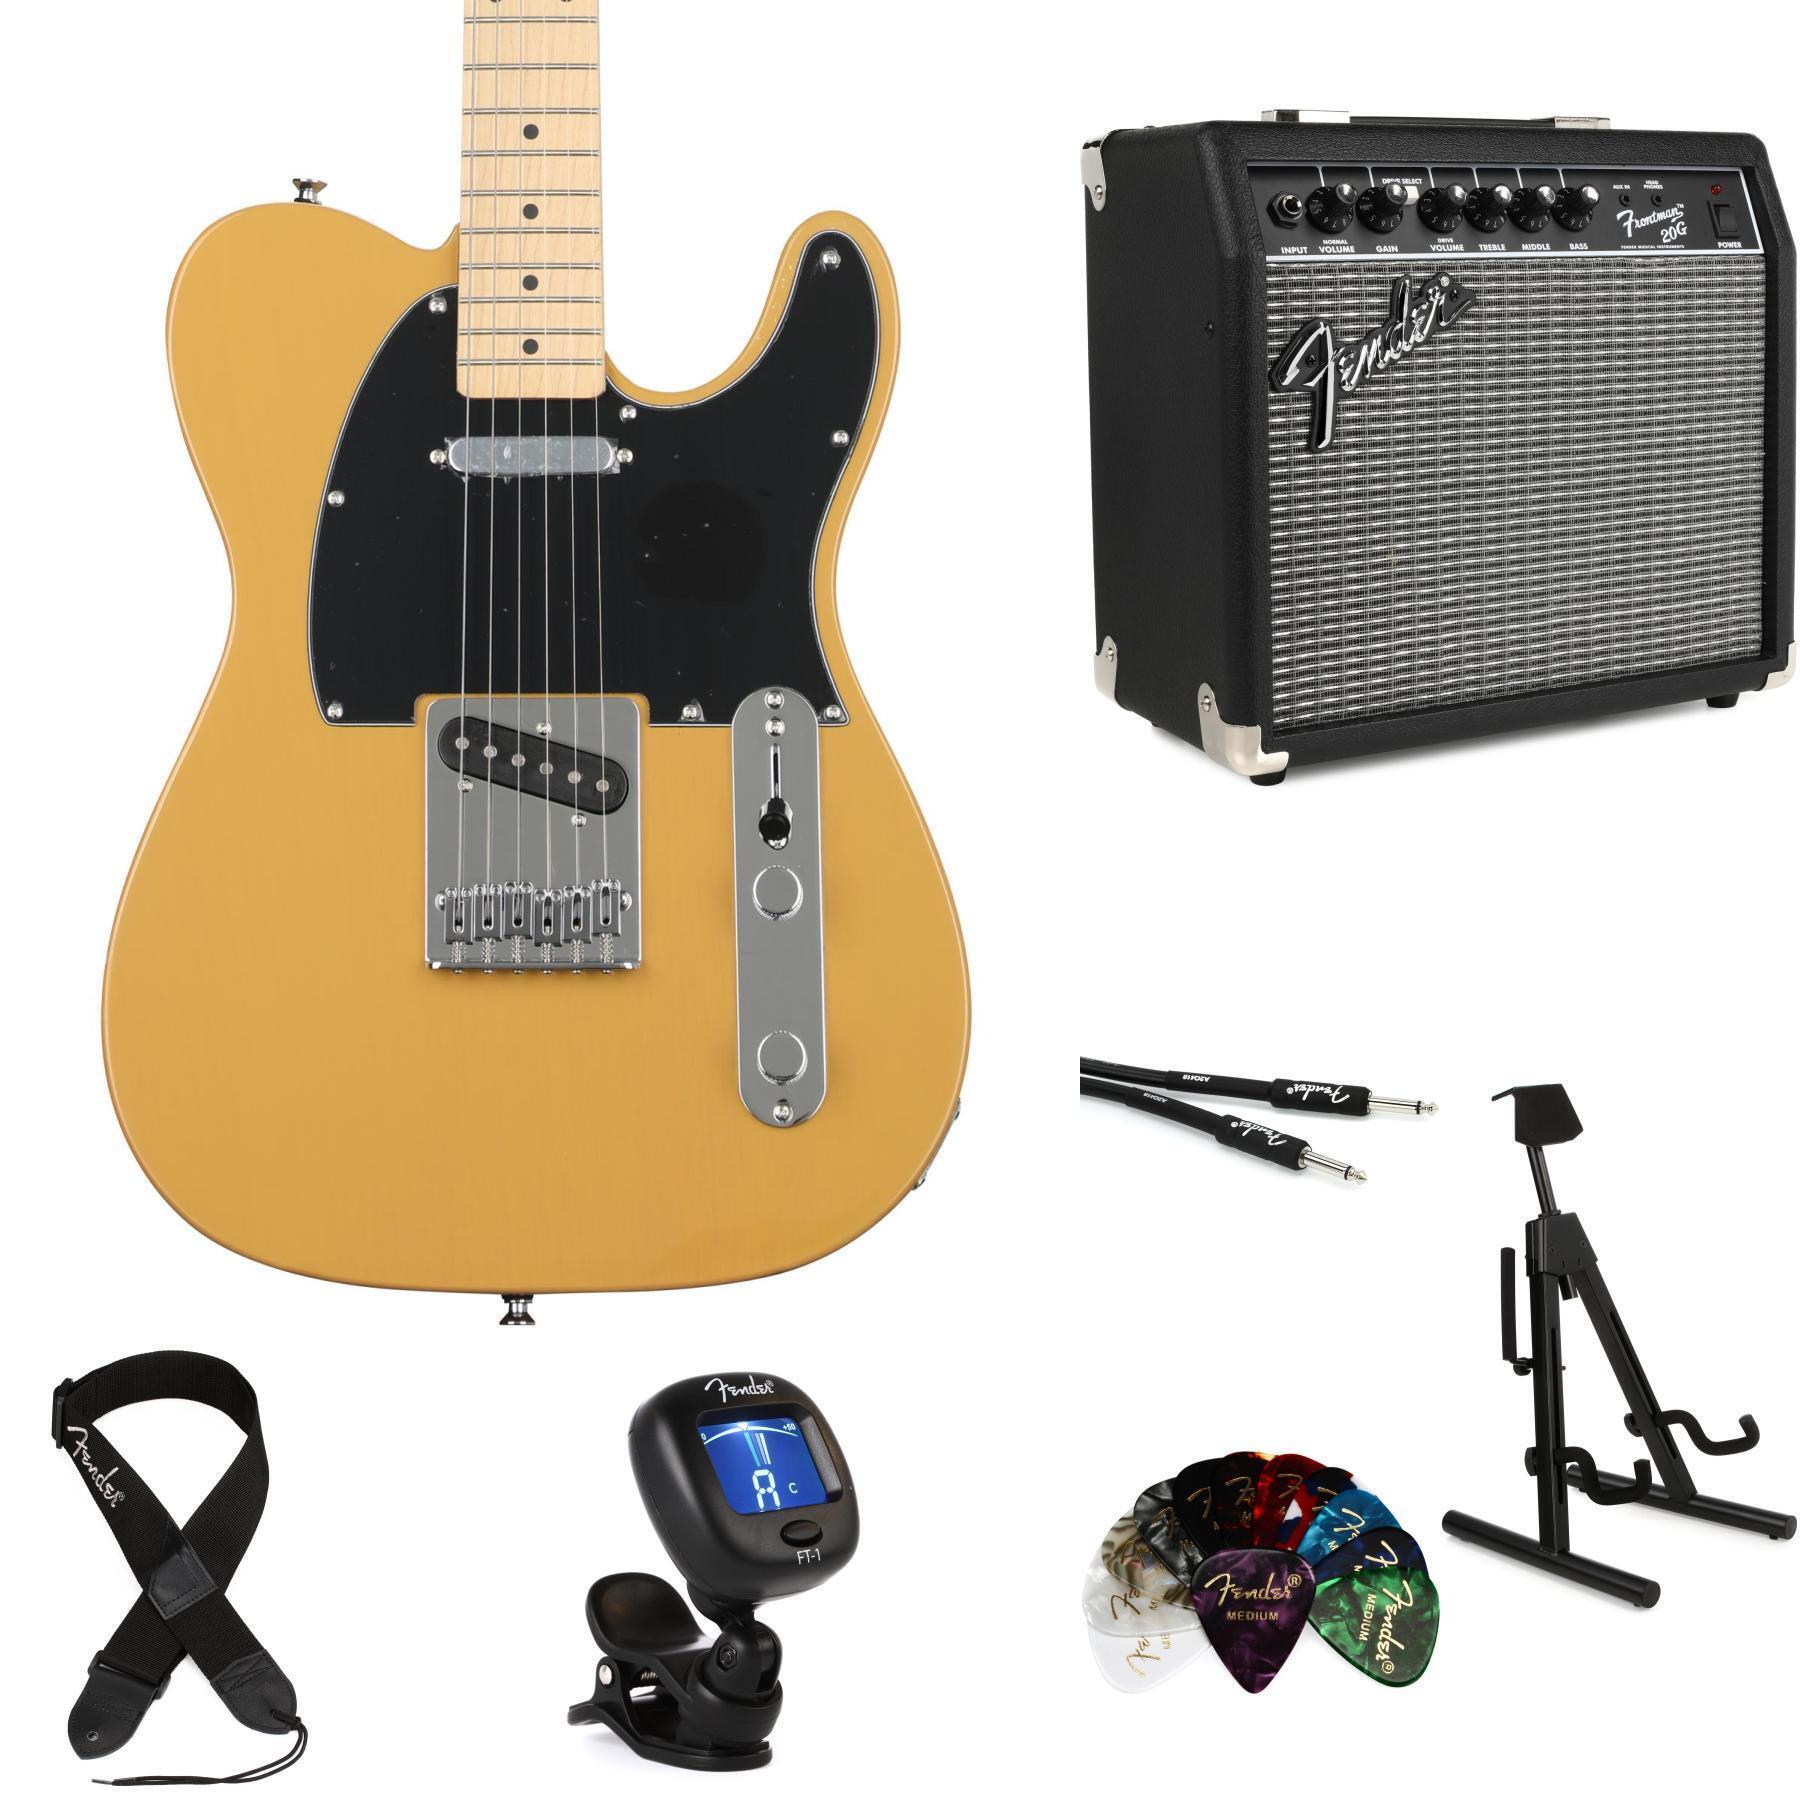 Squier Affinity Series Telecaster and Fender Frontman 20G